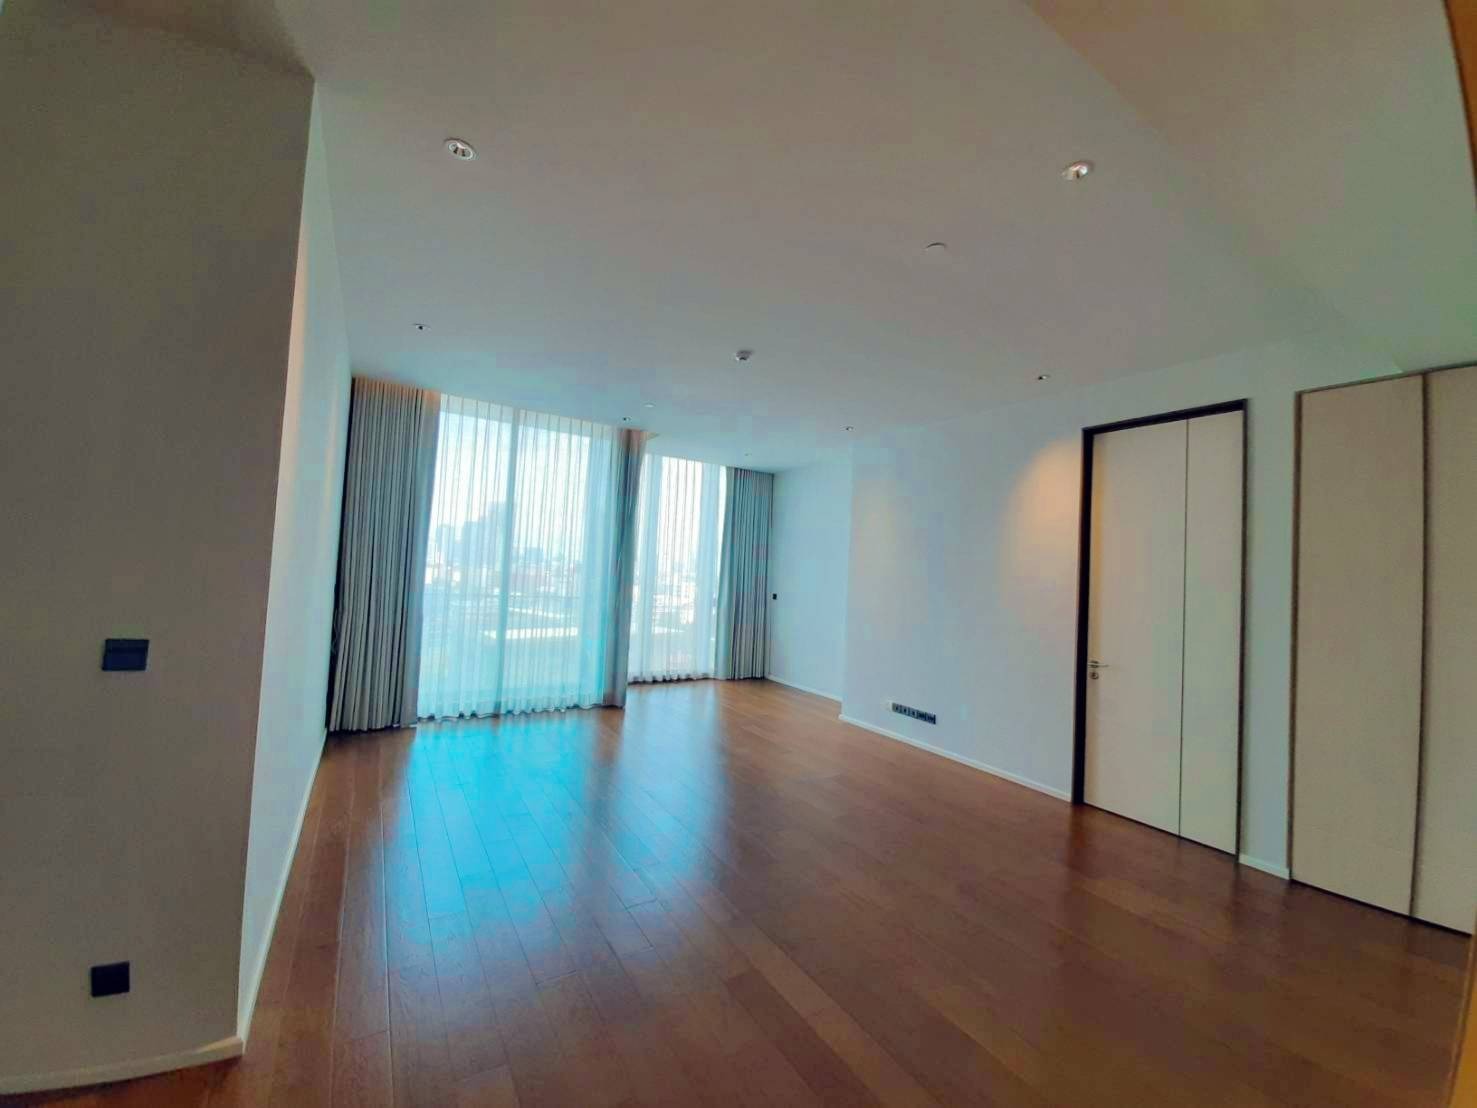 2 Bedrooms, 2 Bathrooms 106sqm size Kraam Sukhumvit 26 For Rent 95000THB For Sale 33000000THB